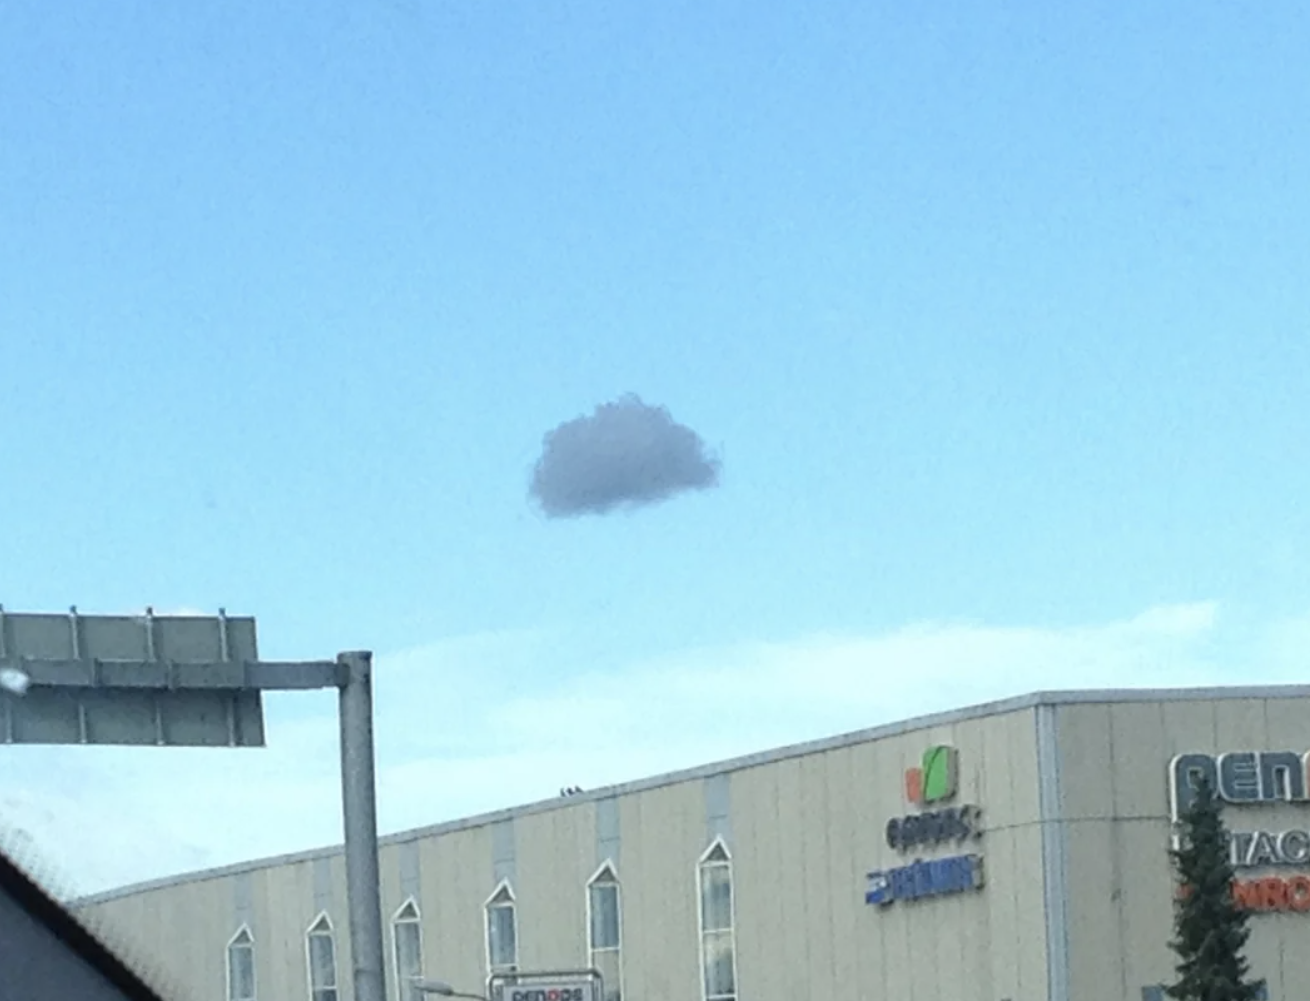 Small cloud in the sky above a building